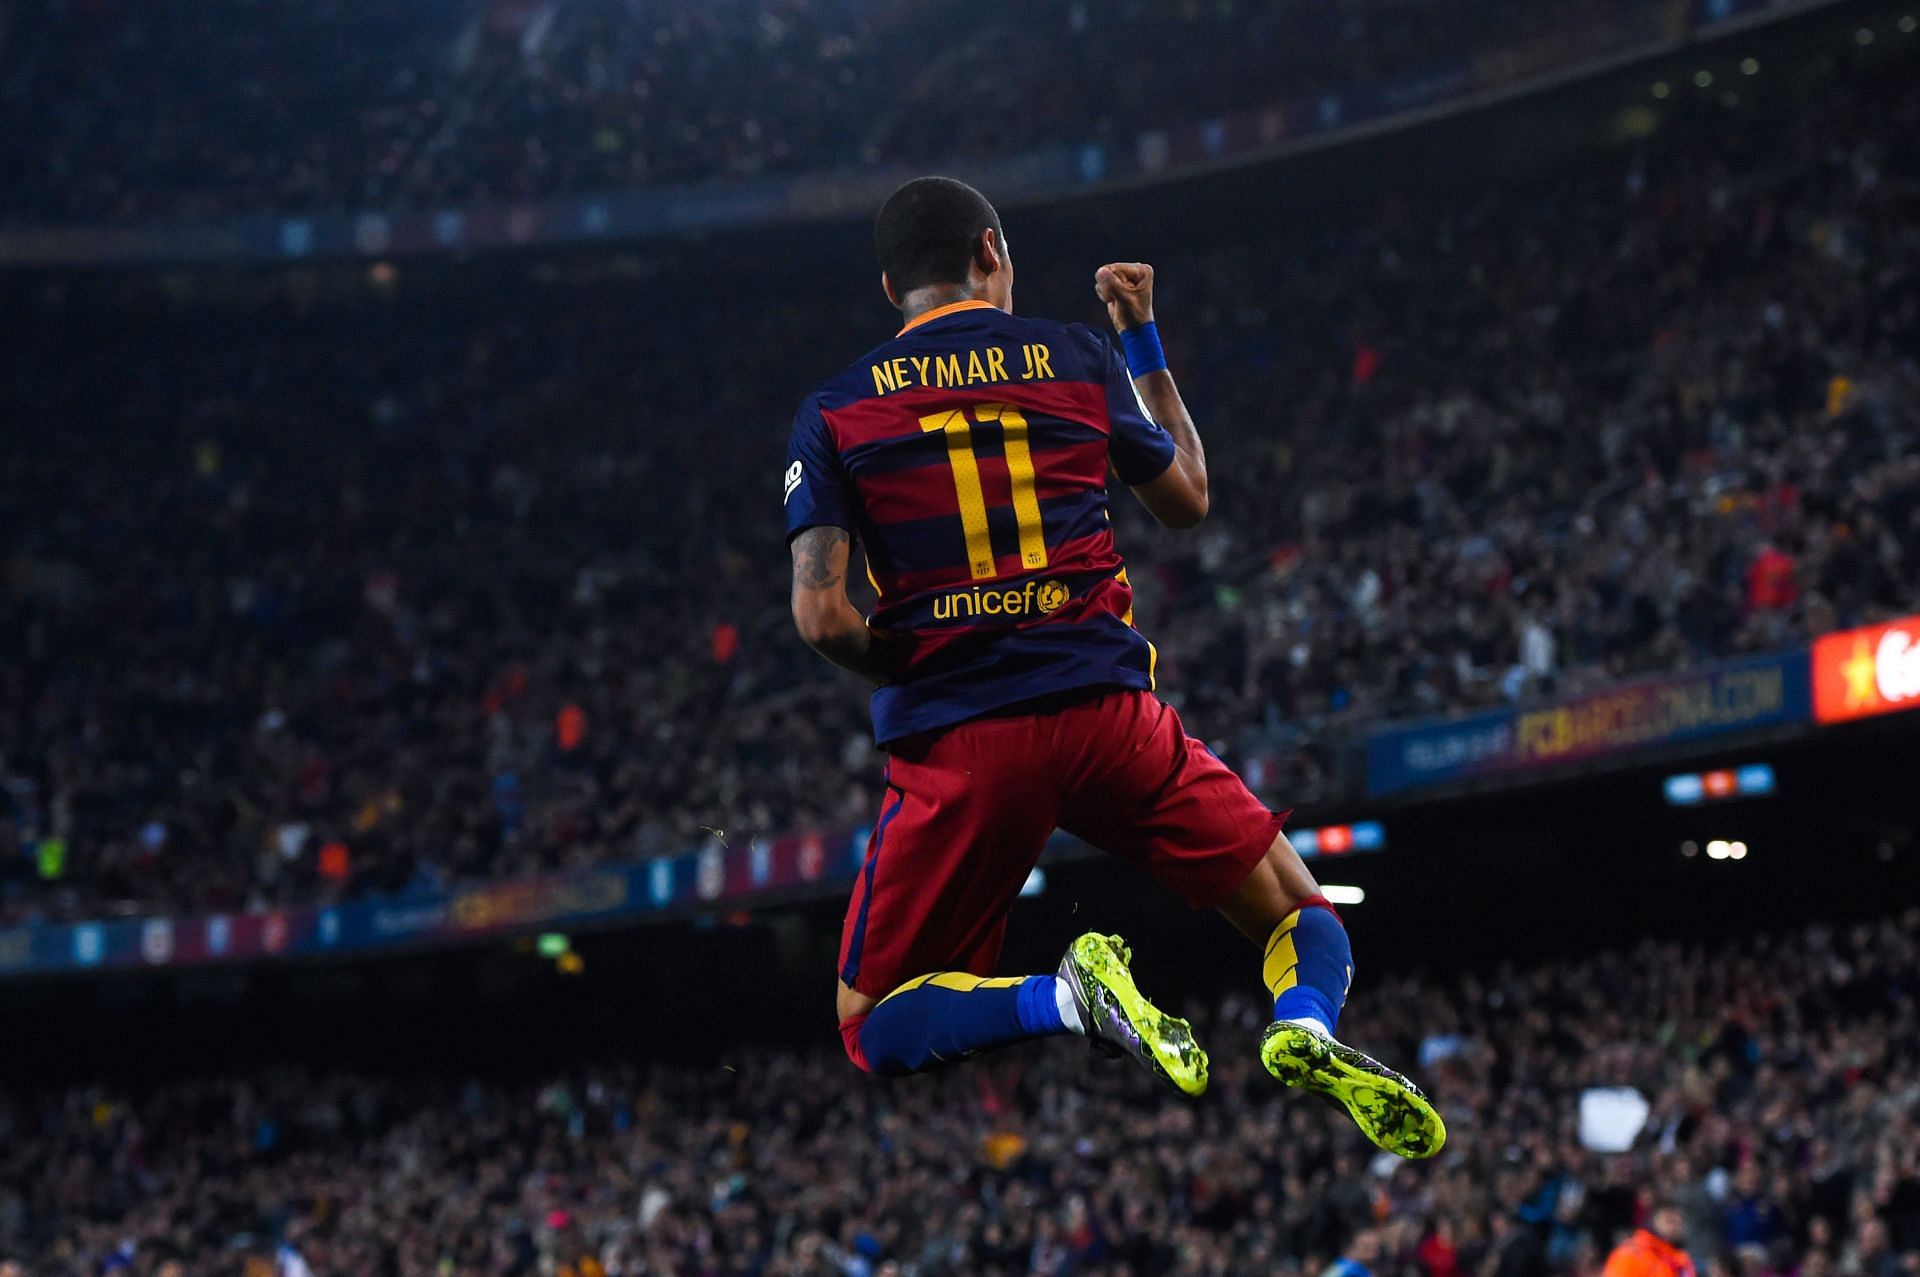 The signs are pointing towards Neymar returning to the Camp Nou.